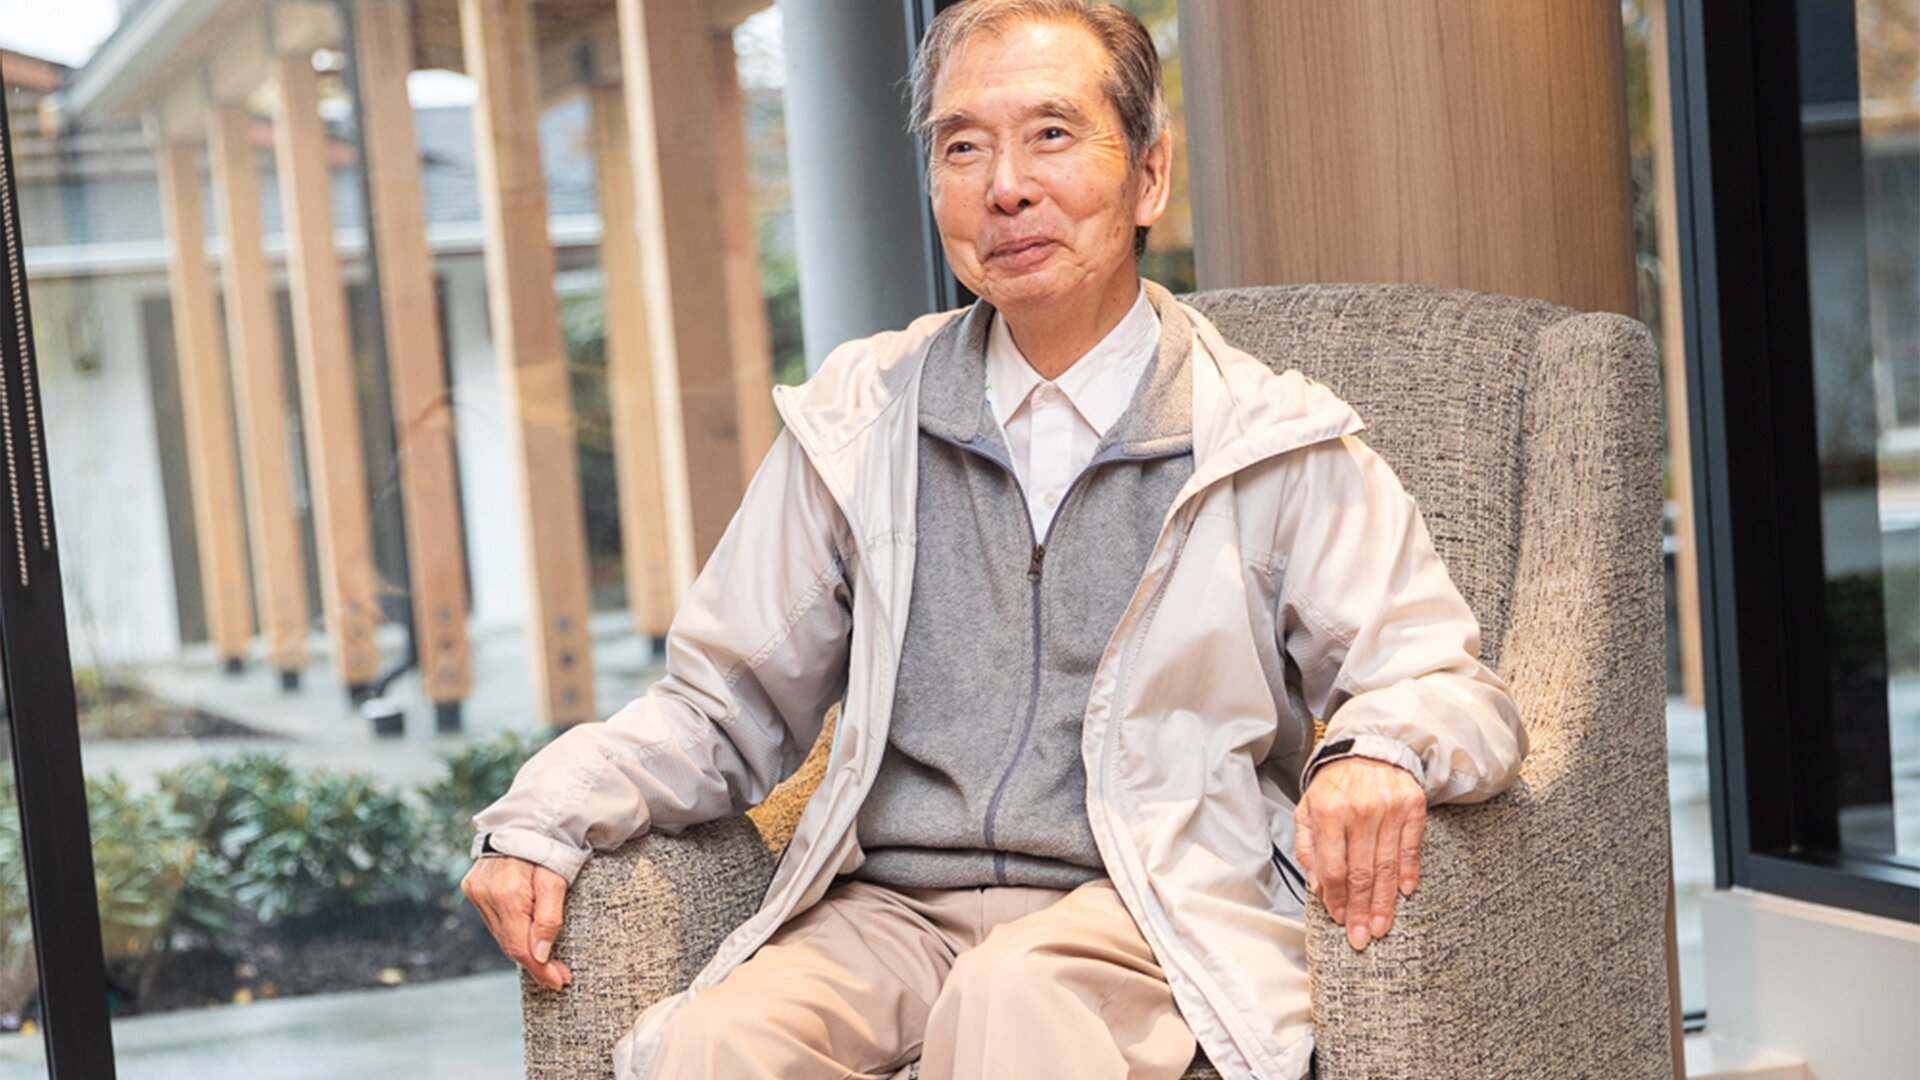 An elderly man smiling while sitting in a chair in senior housing